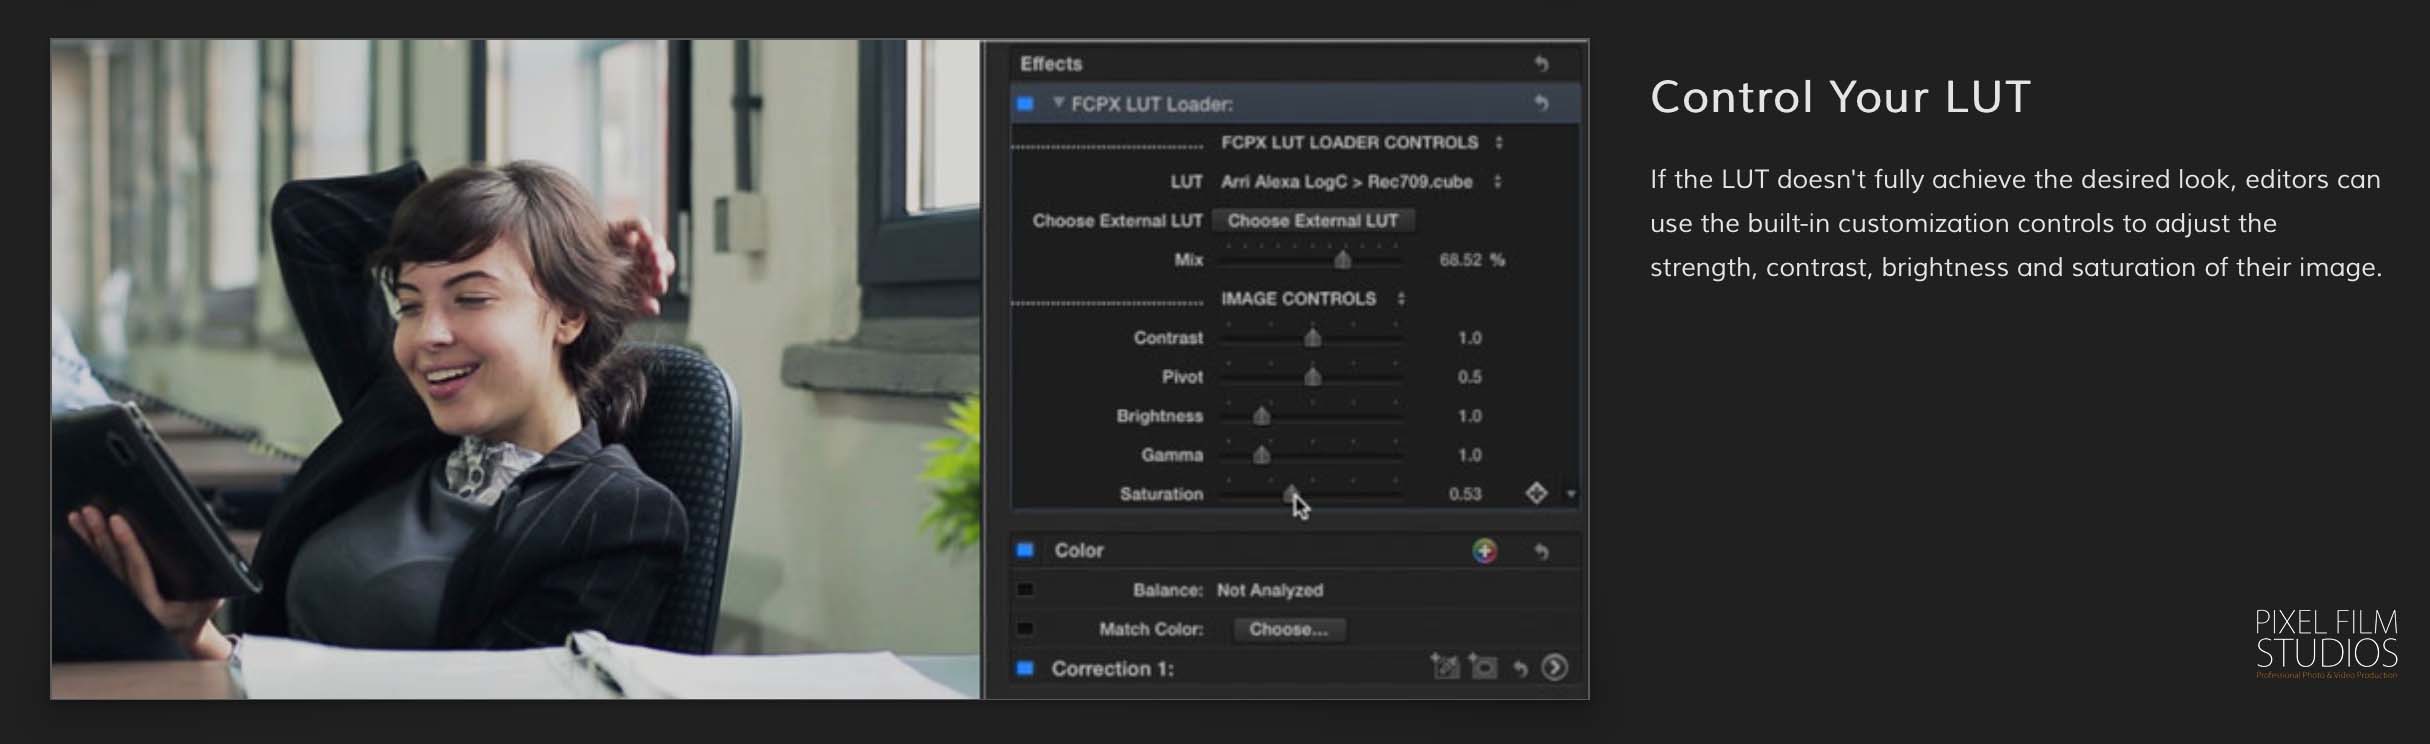 Free LUT Loader tool for Final Cut Pro X from Pixel Film Studios